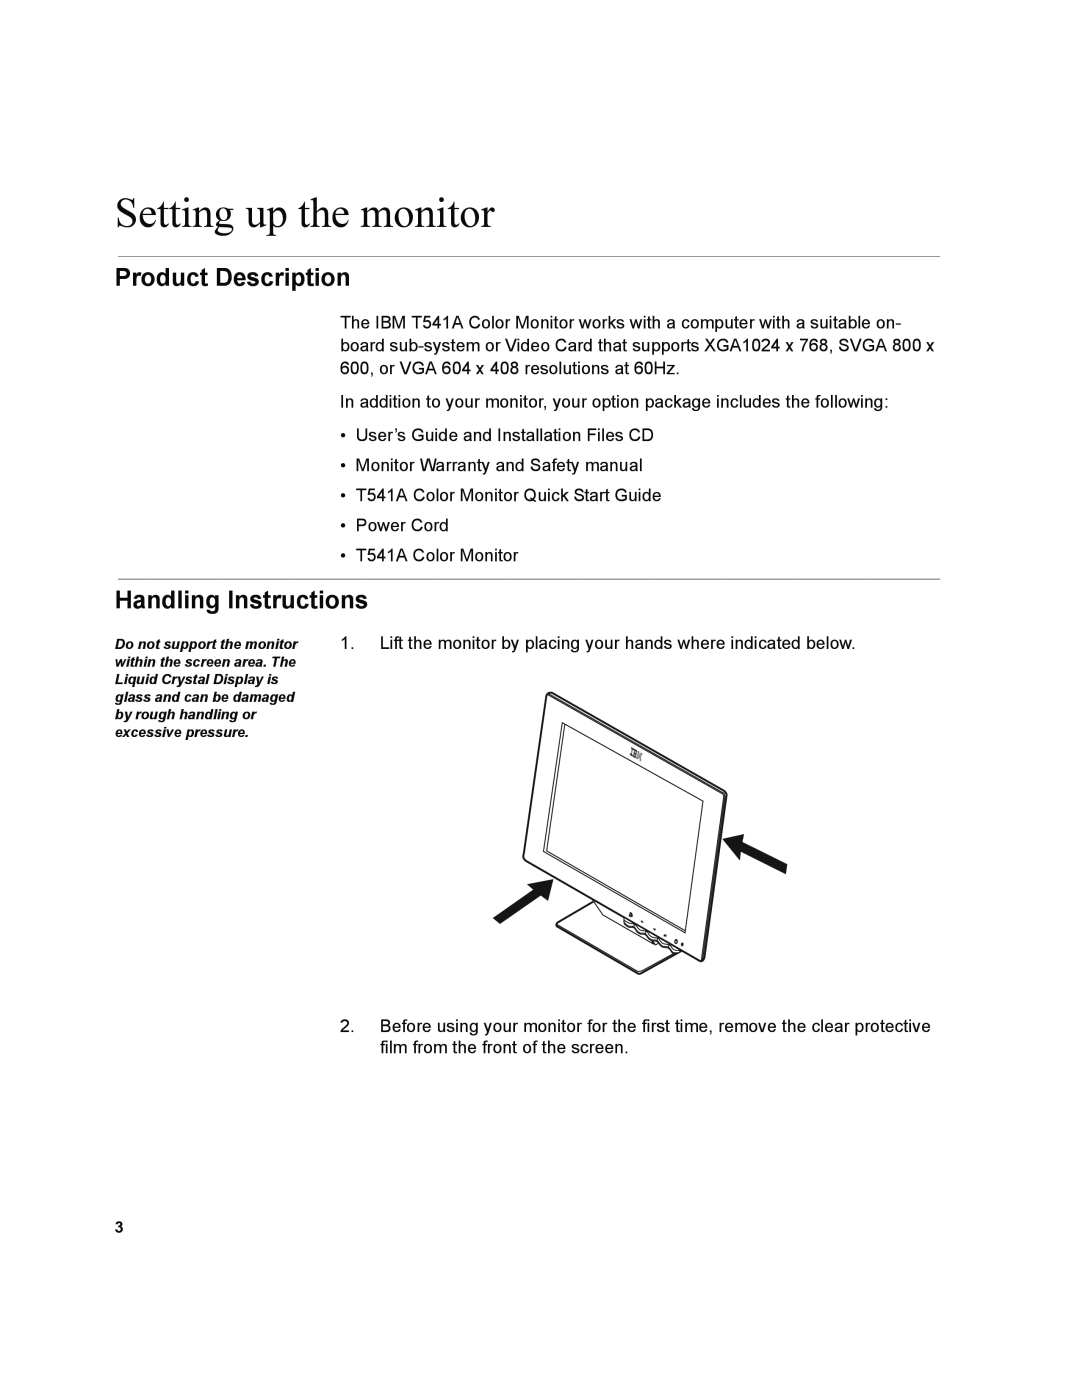 IBM T541A manual Setting up the monitor, Product Description, Handling Instructions 